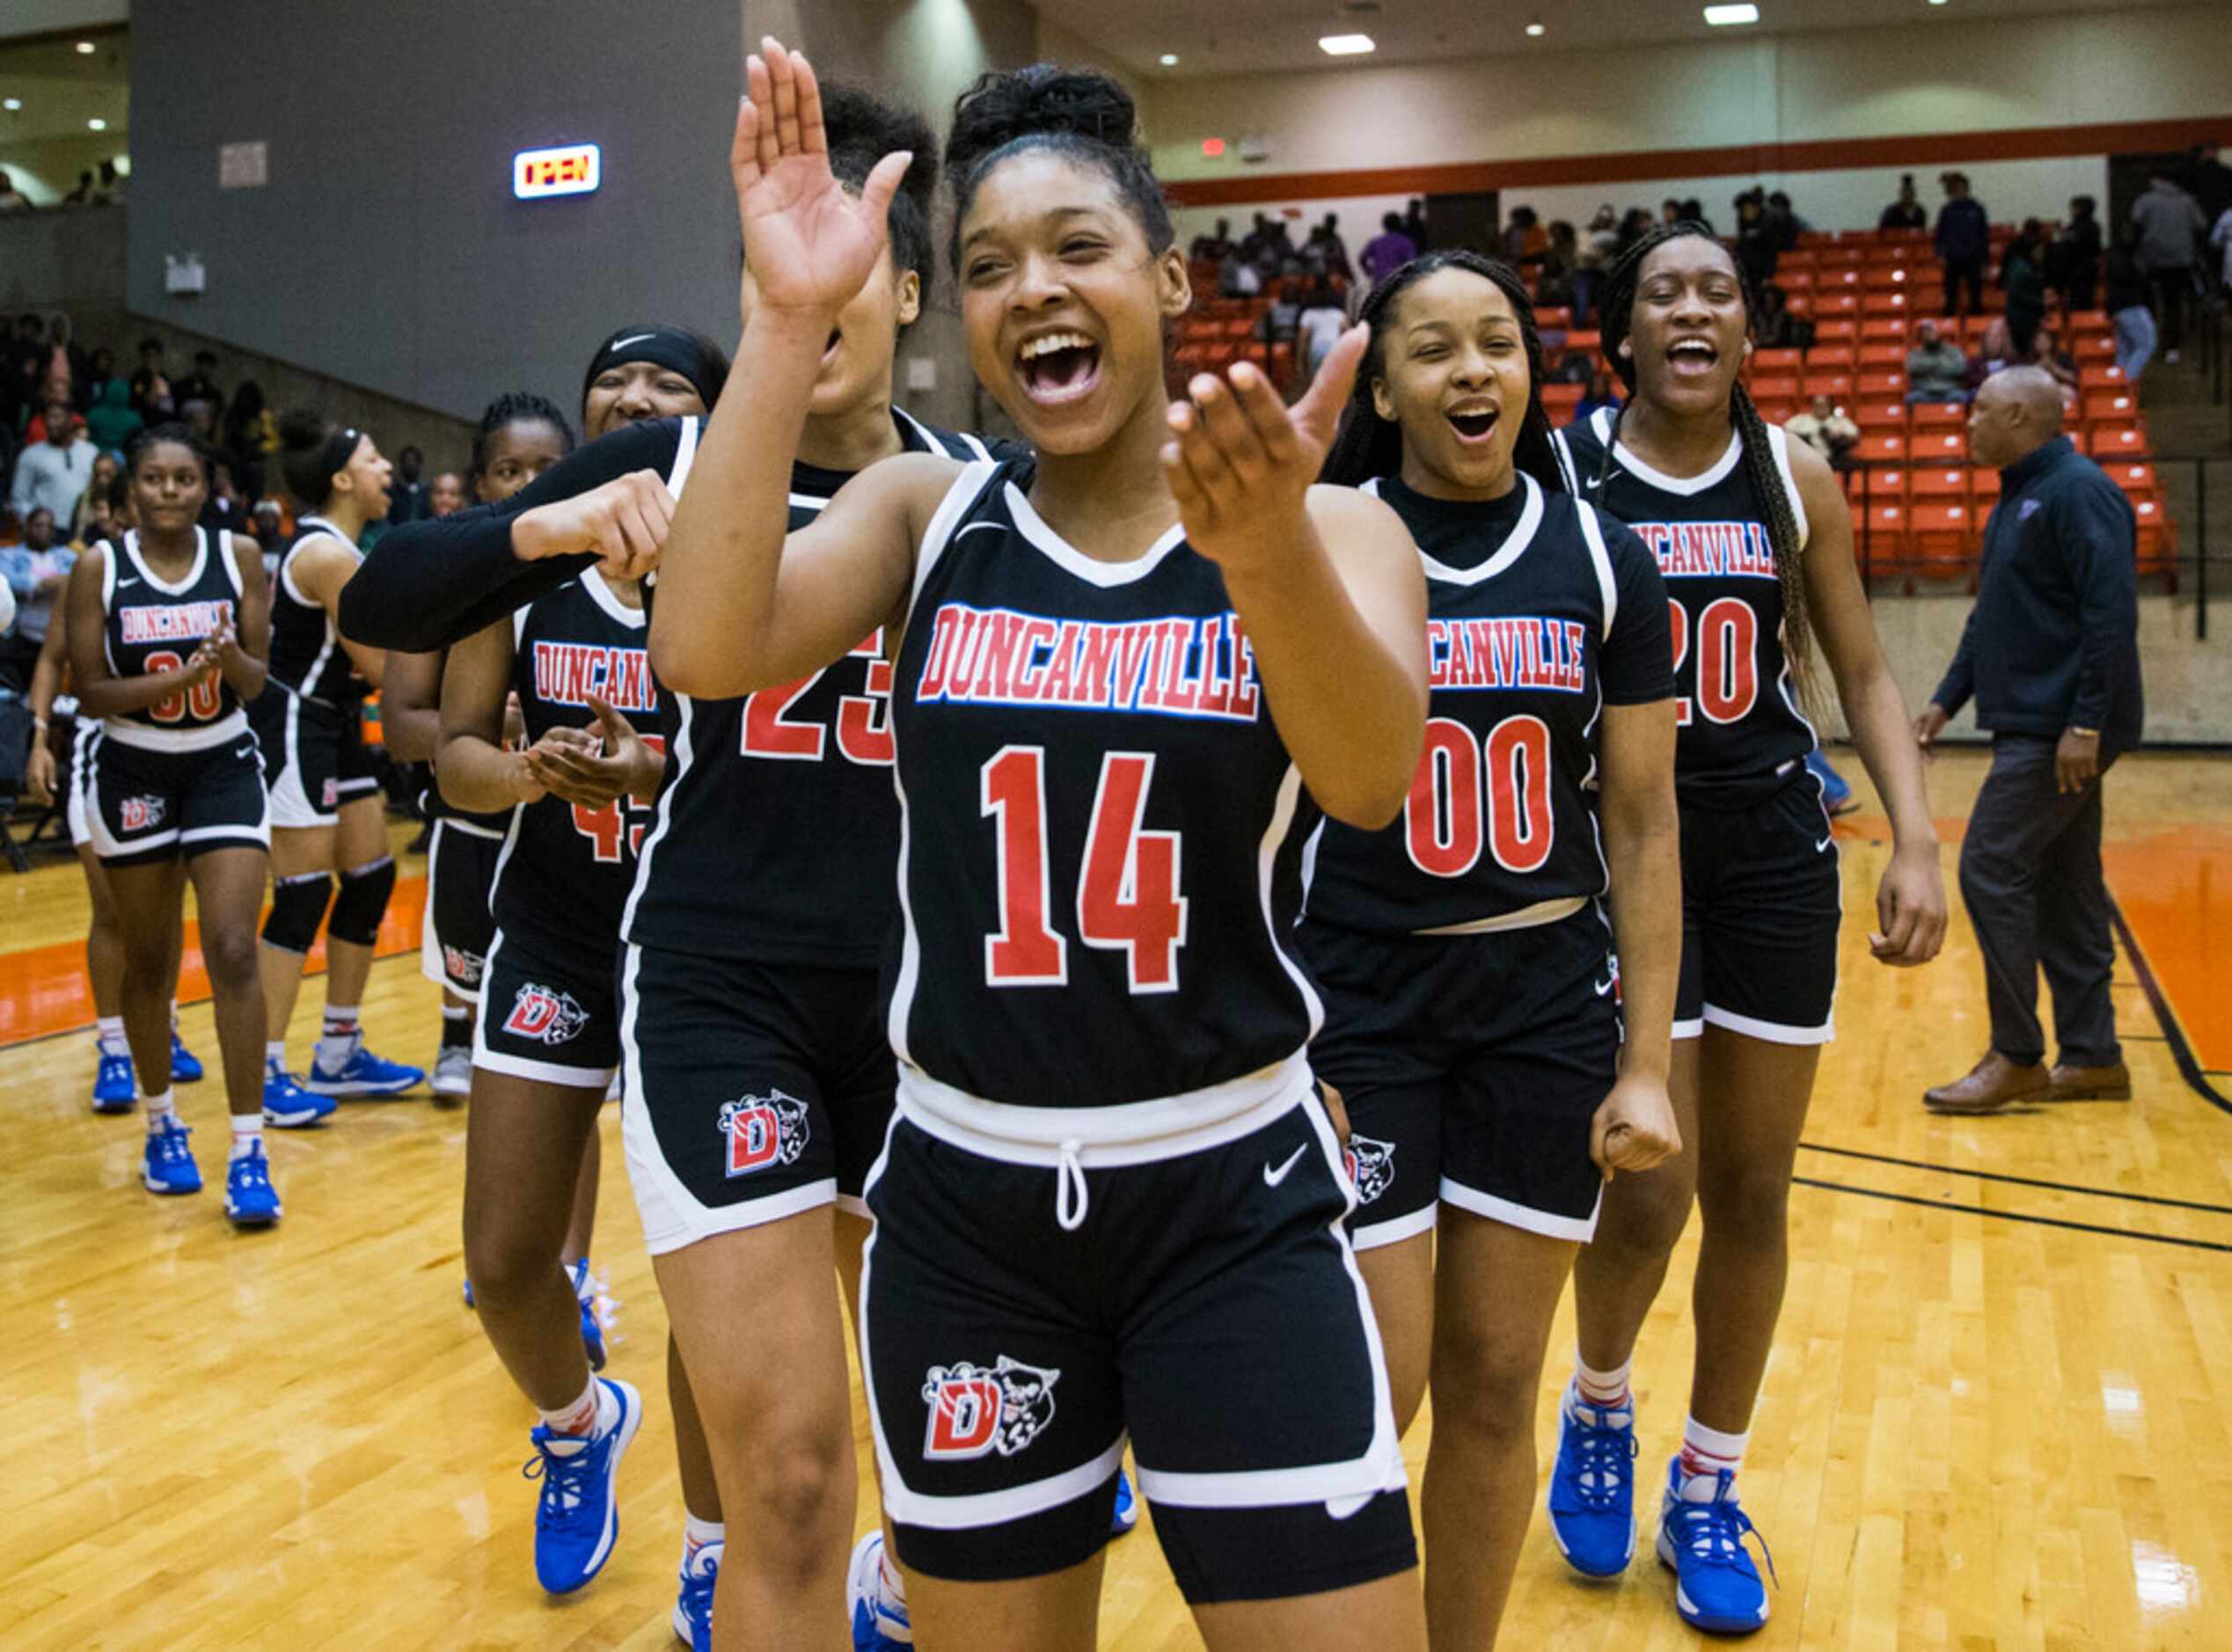 Duncanville's Kiyara Howard (14) and the rest of the team celebrates a 47-43 win after a...